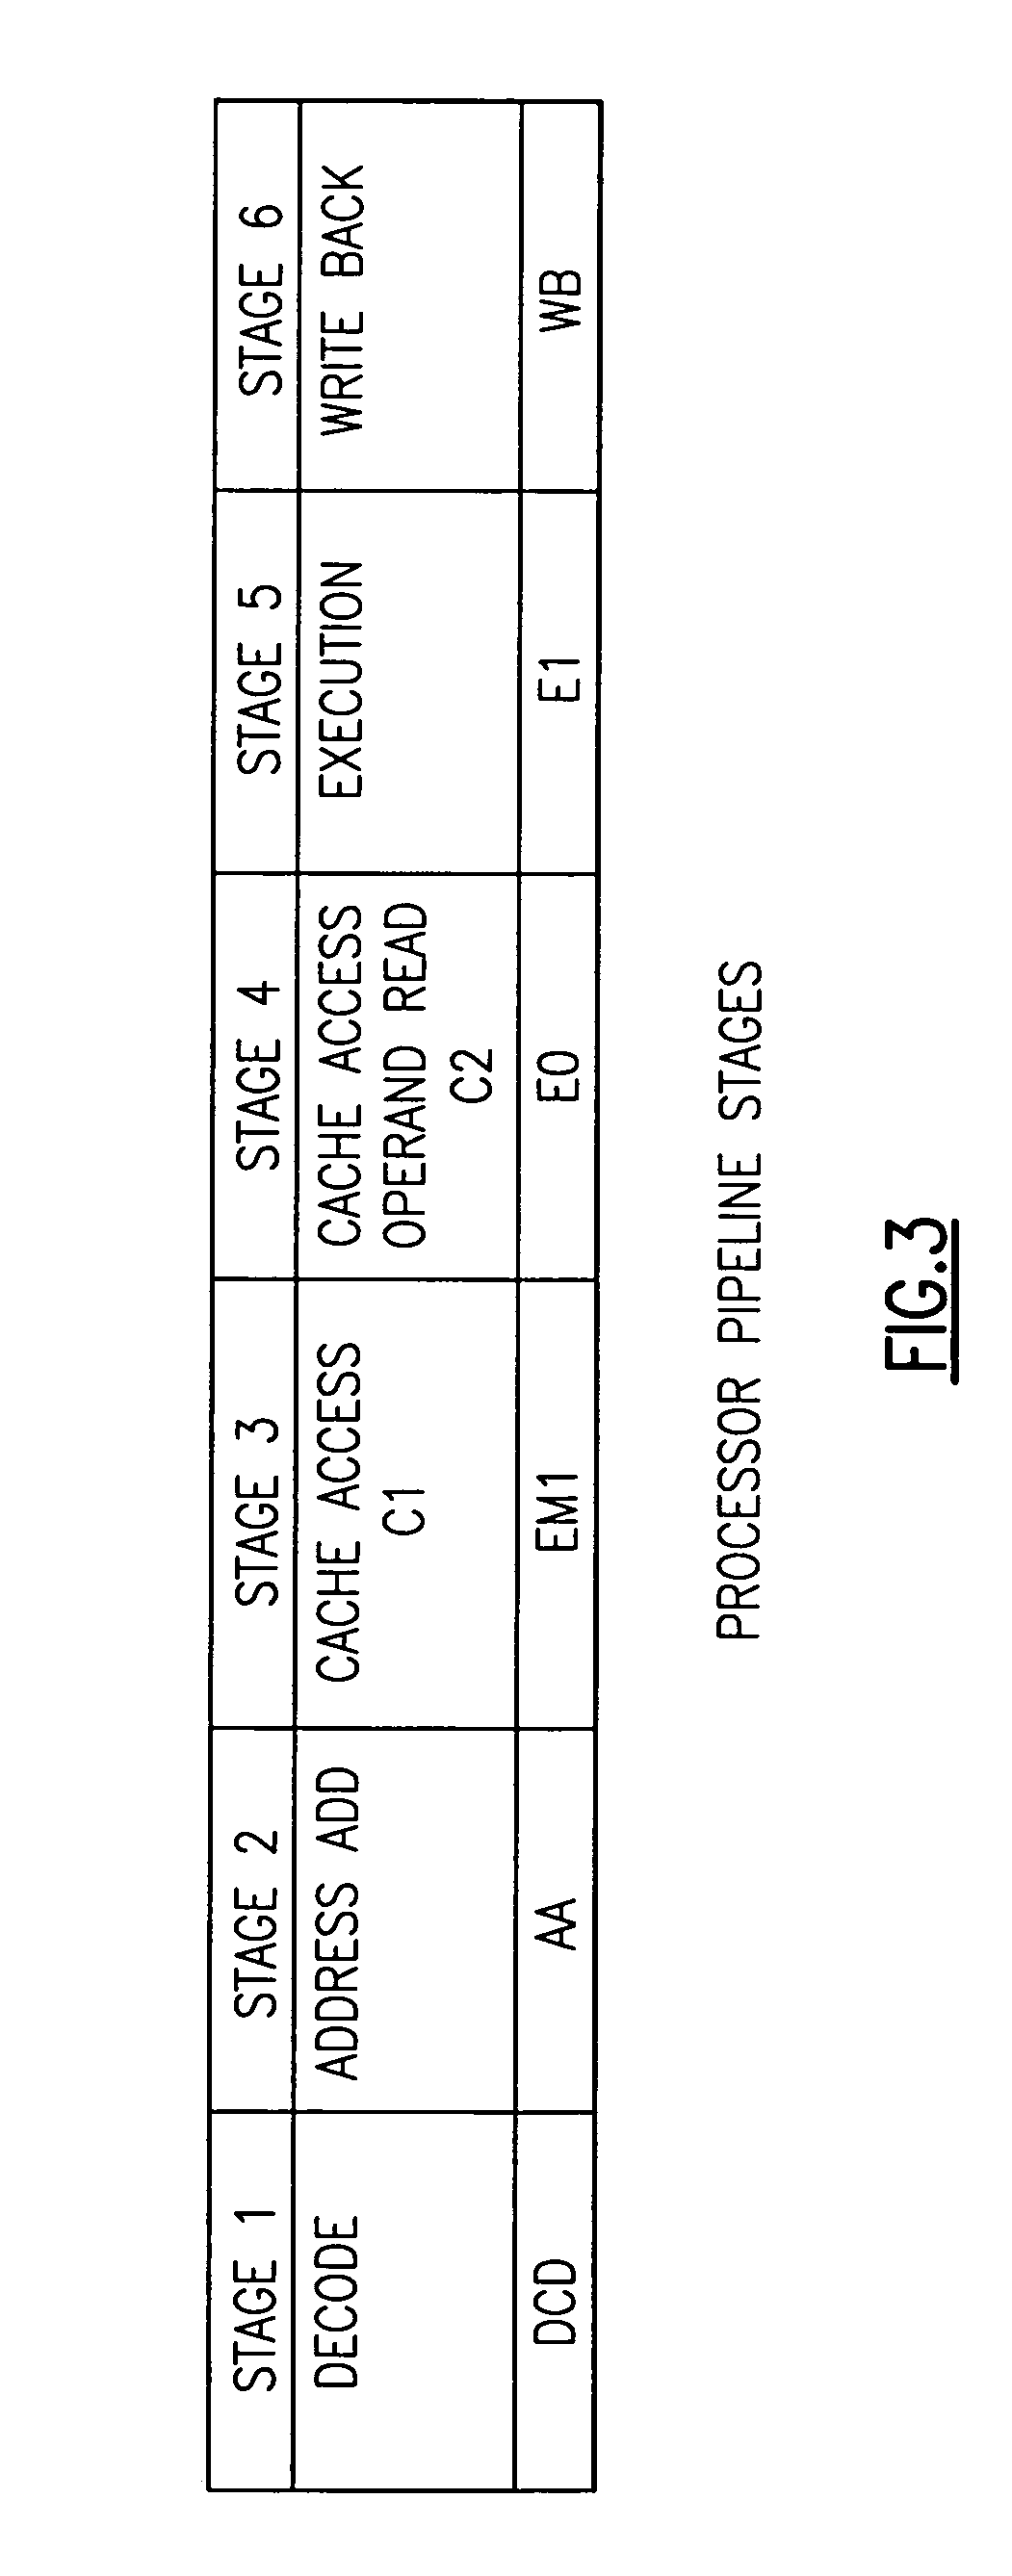 Superscalar microprocessor having multi-pipe dispatch and execution unit